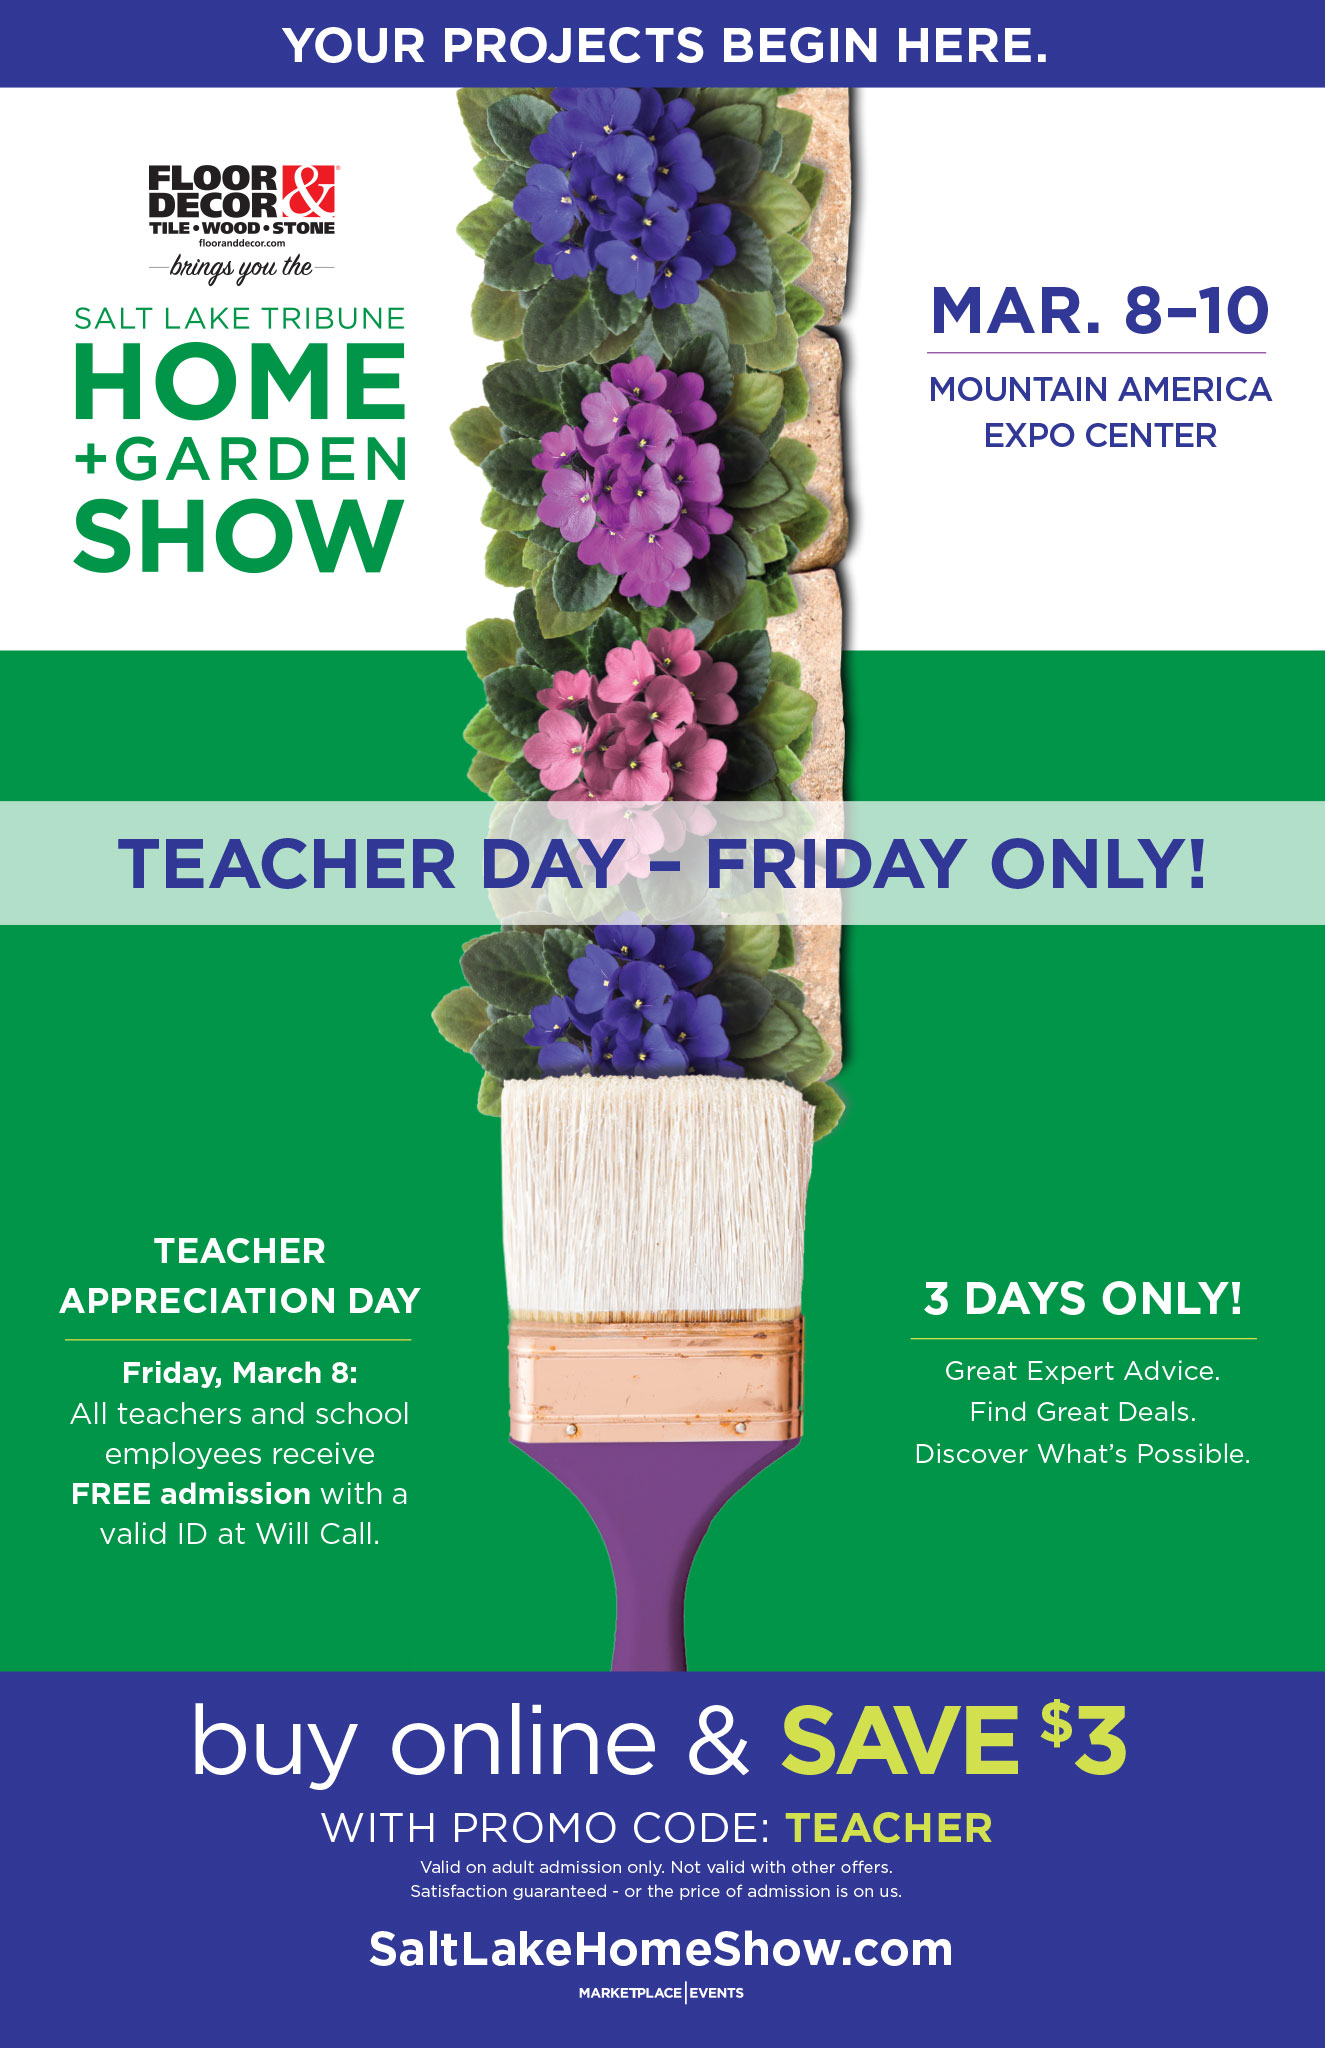 Your Projects Begin Here | Teacher Day - Friday Only!